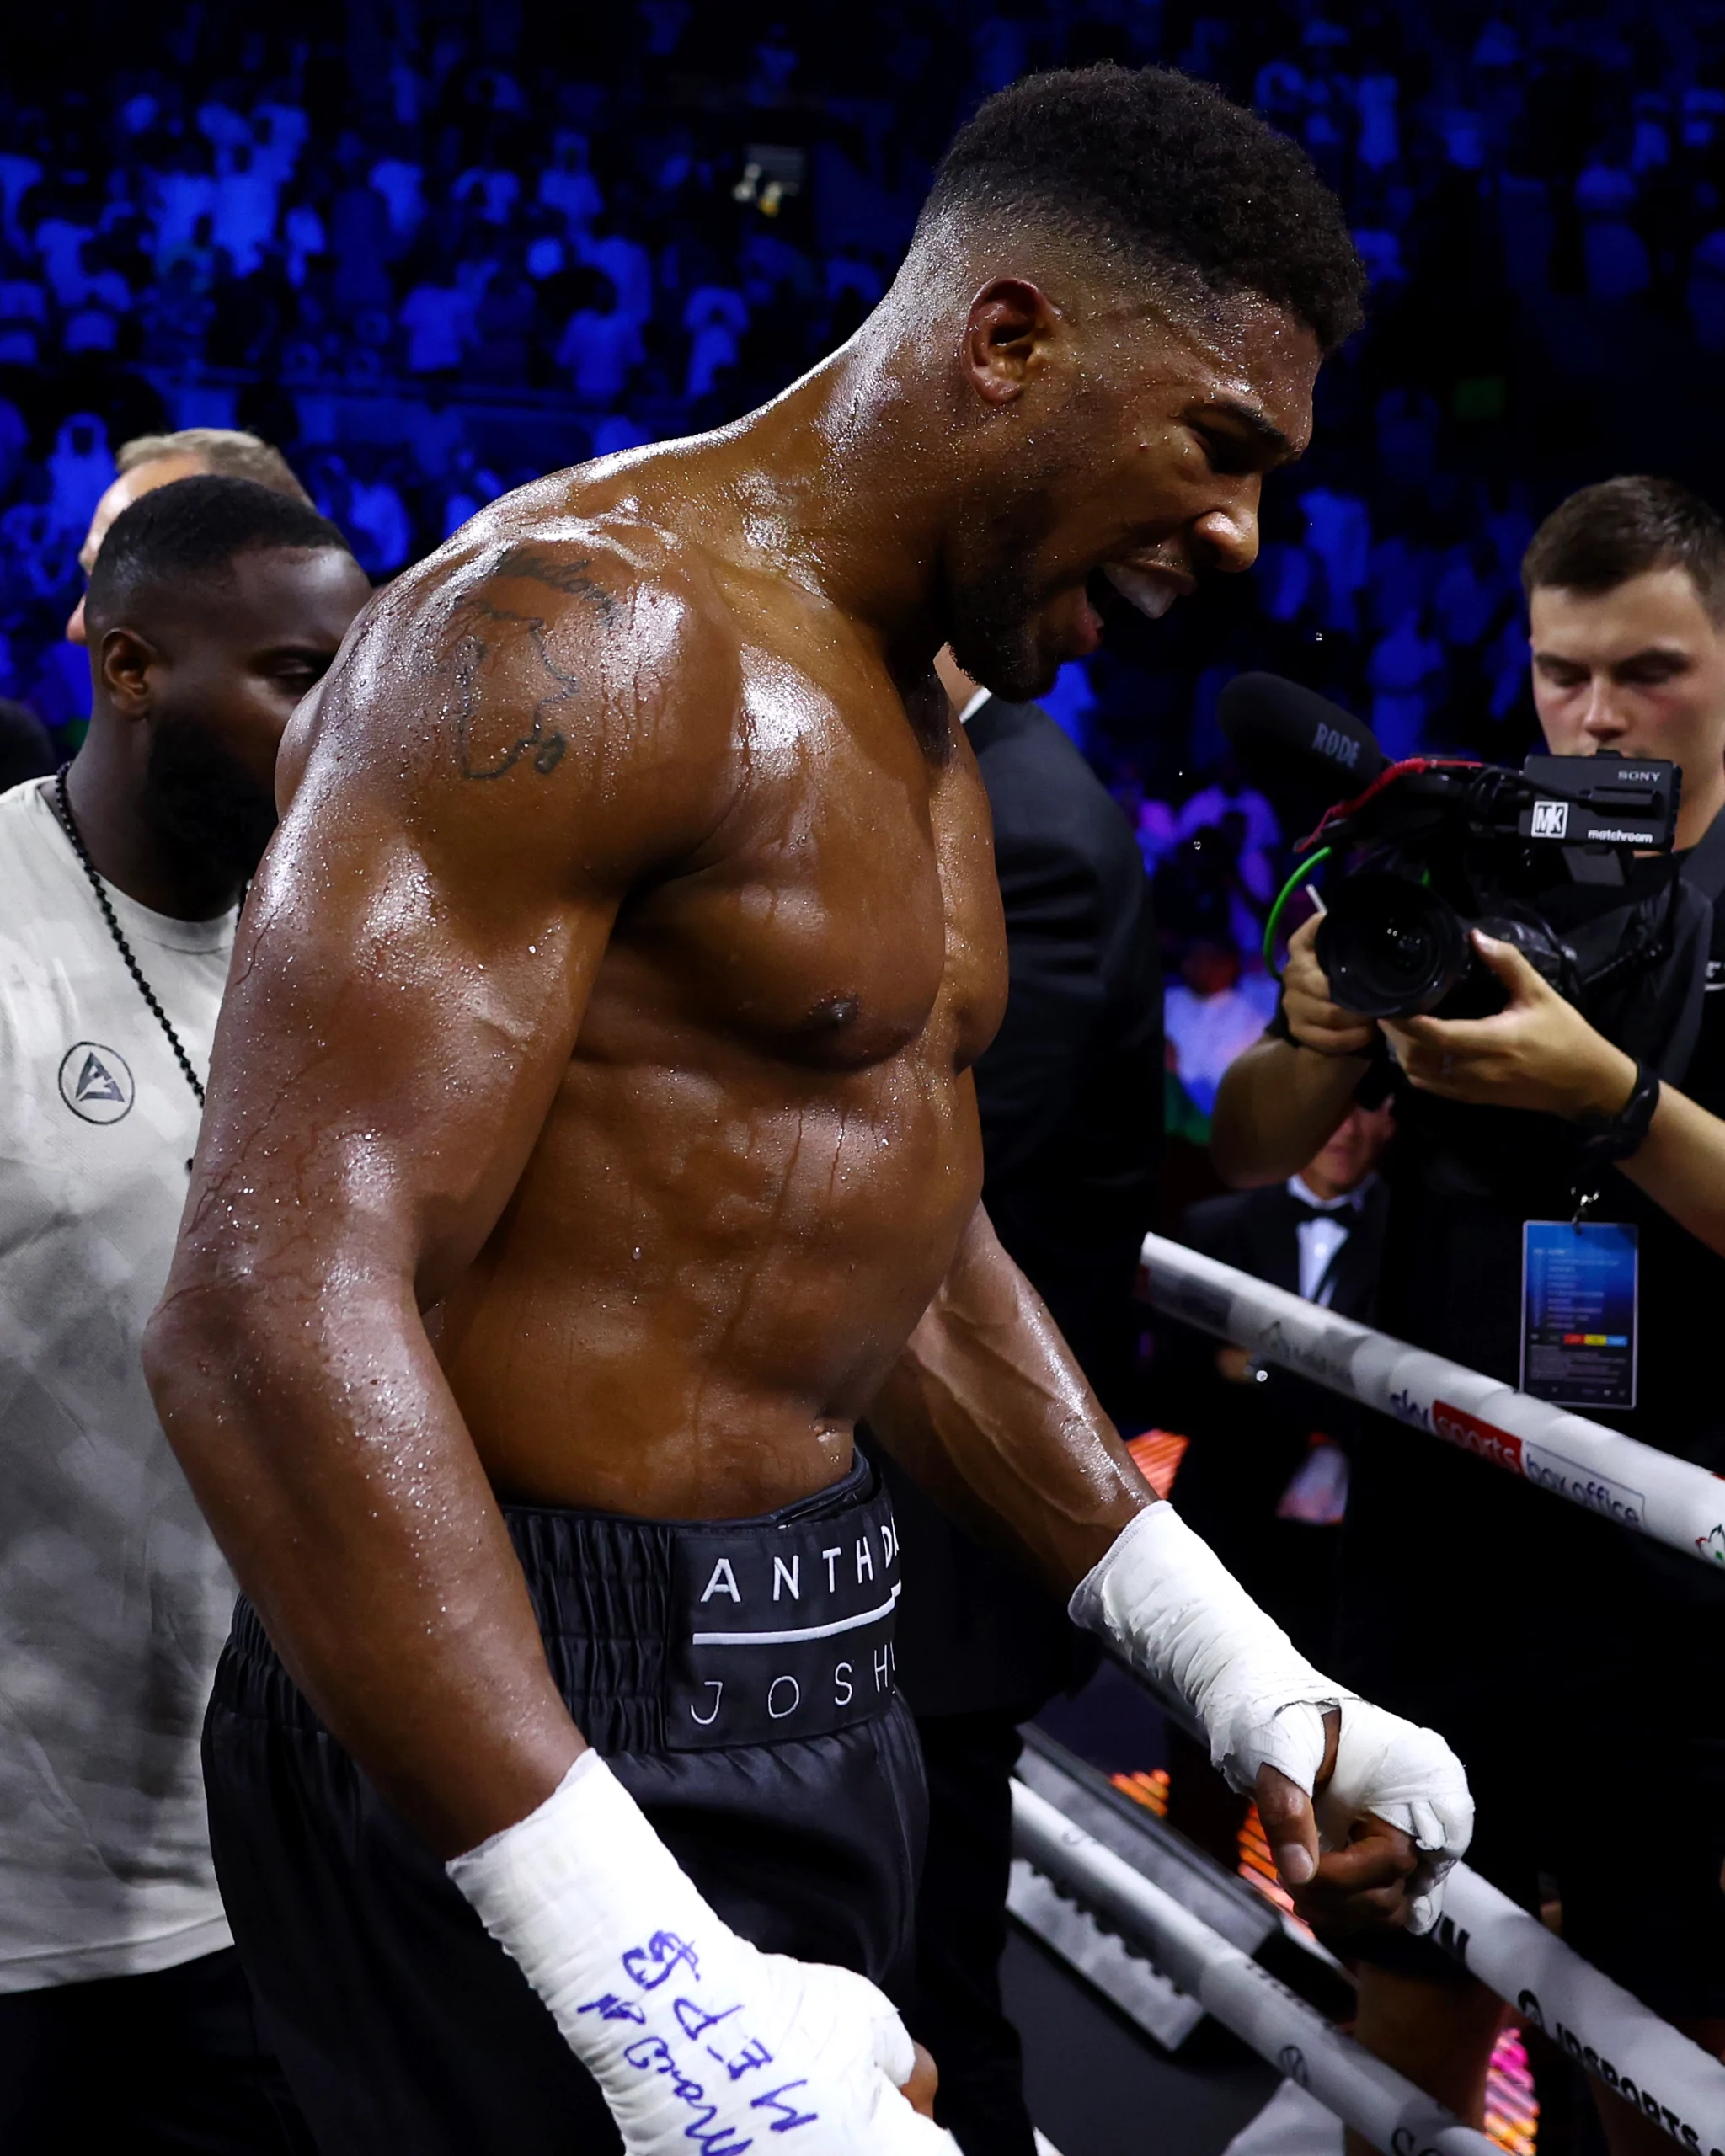 Despite defeats, Joshua maintains that he is one of the world's best heavyweights